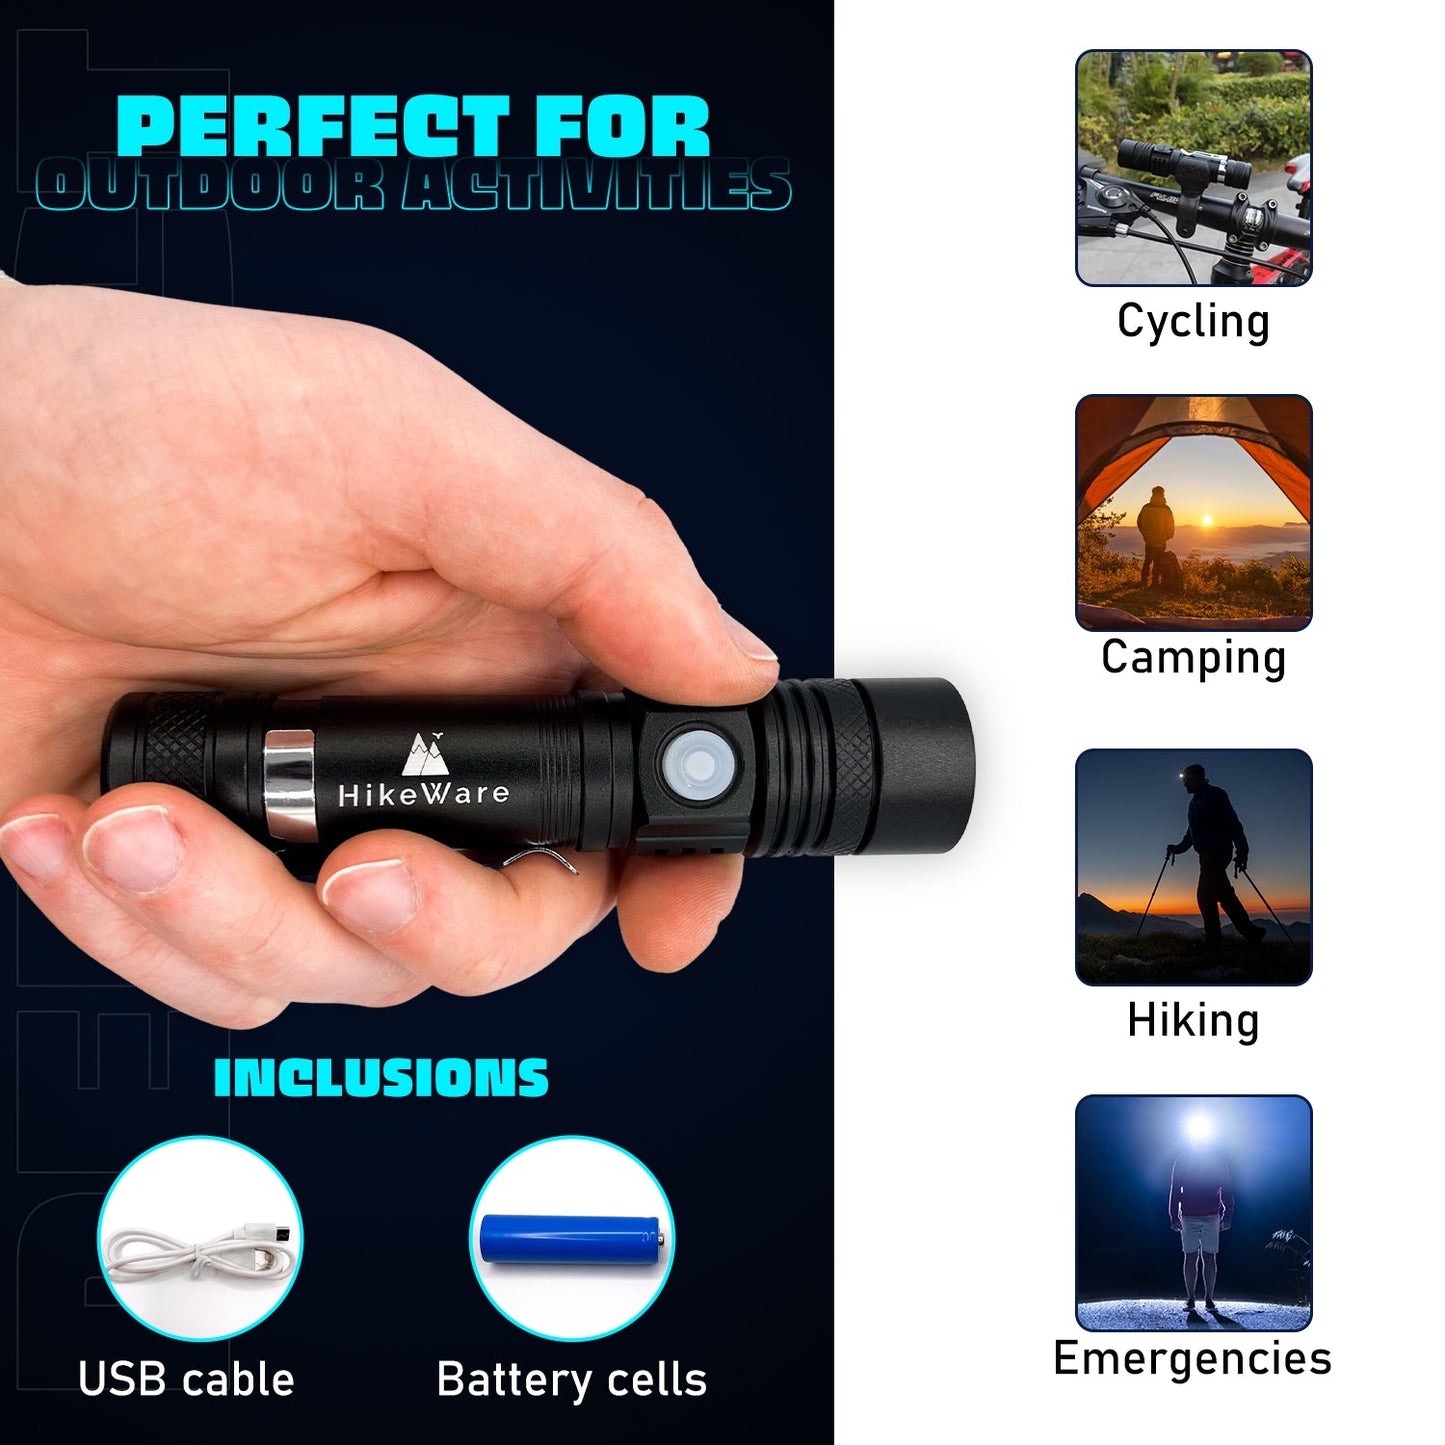 HikeWare Ultra Bright LED Flashlight. Waterproof, Zoomable, USB Rechargeable - HikeWare  Experience the power of HikeWare's Ultra Bright LED Flashlight. Waterproof, lightweight, and 10x brighter than incandescent lights.